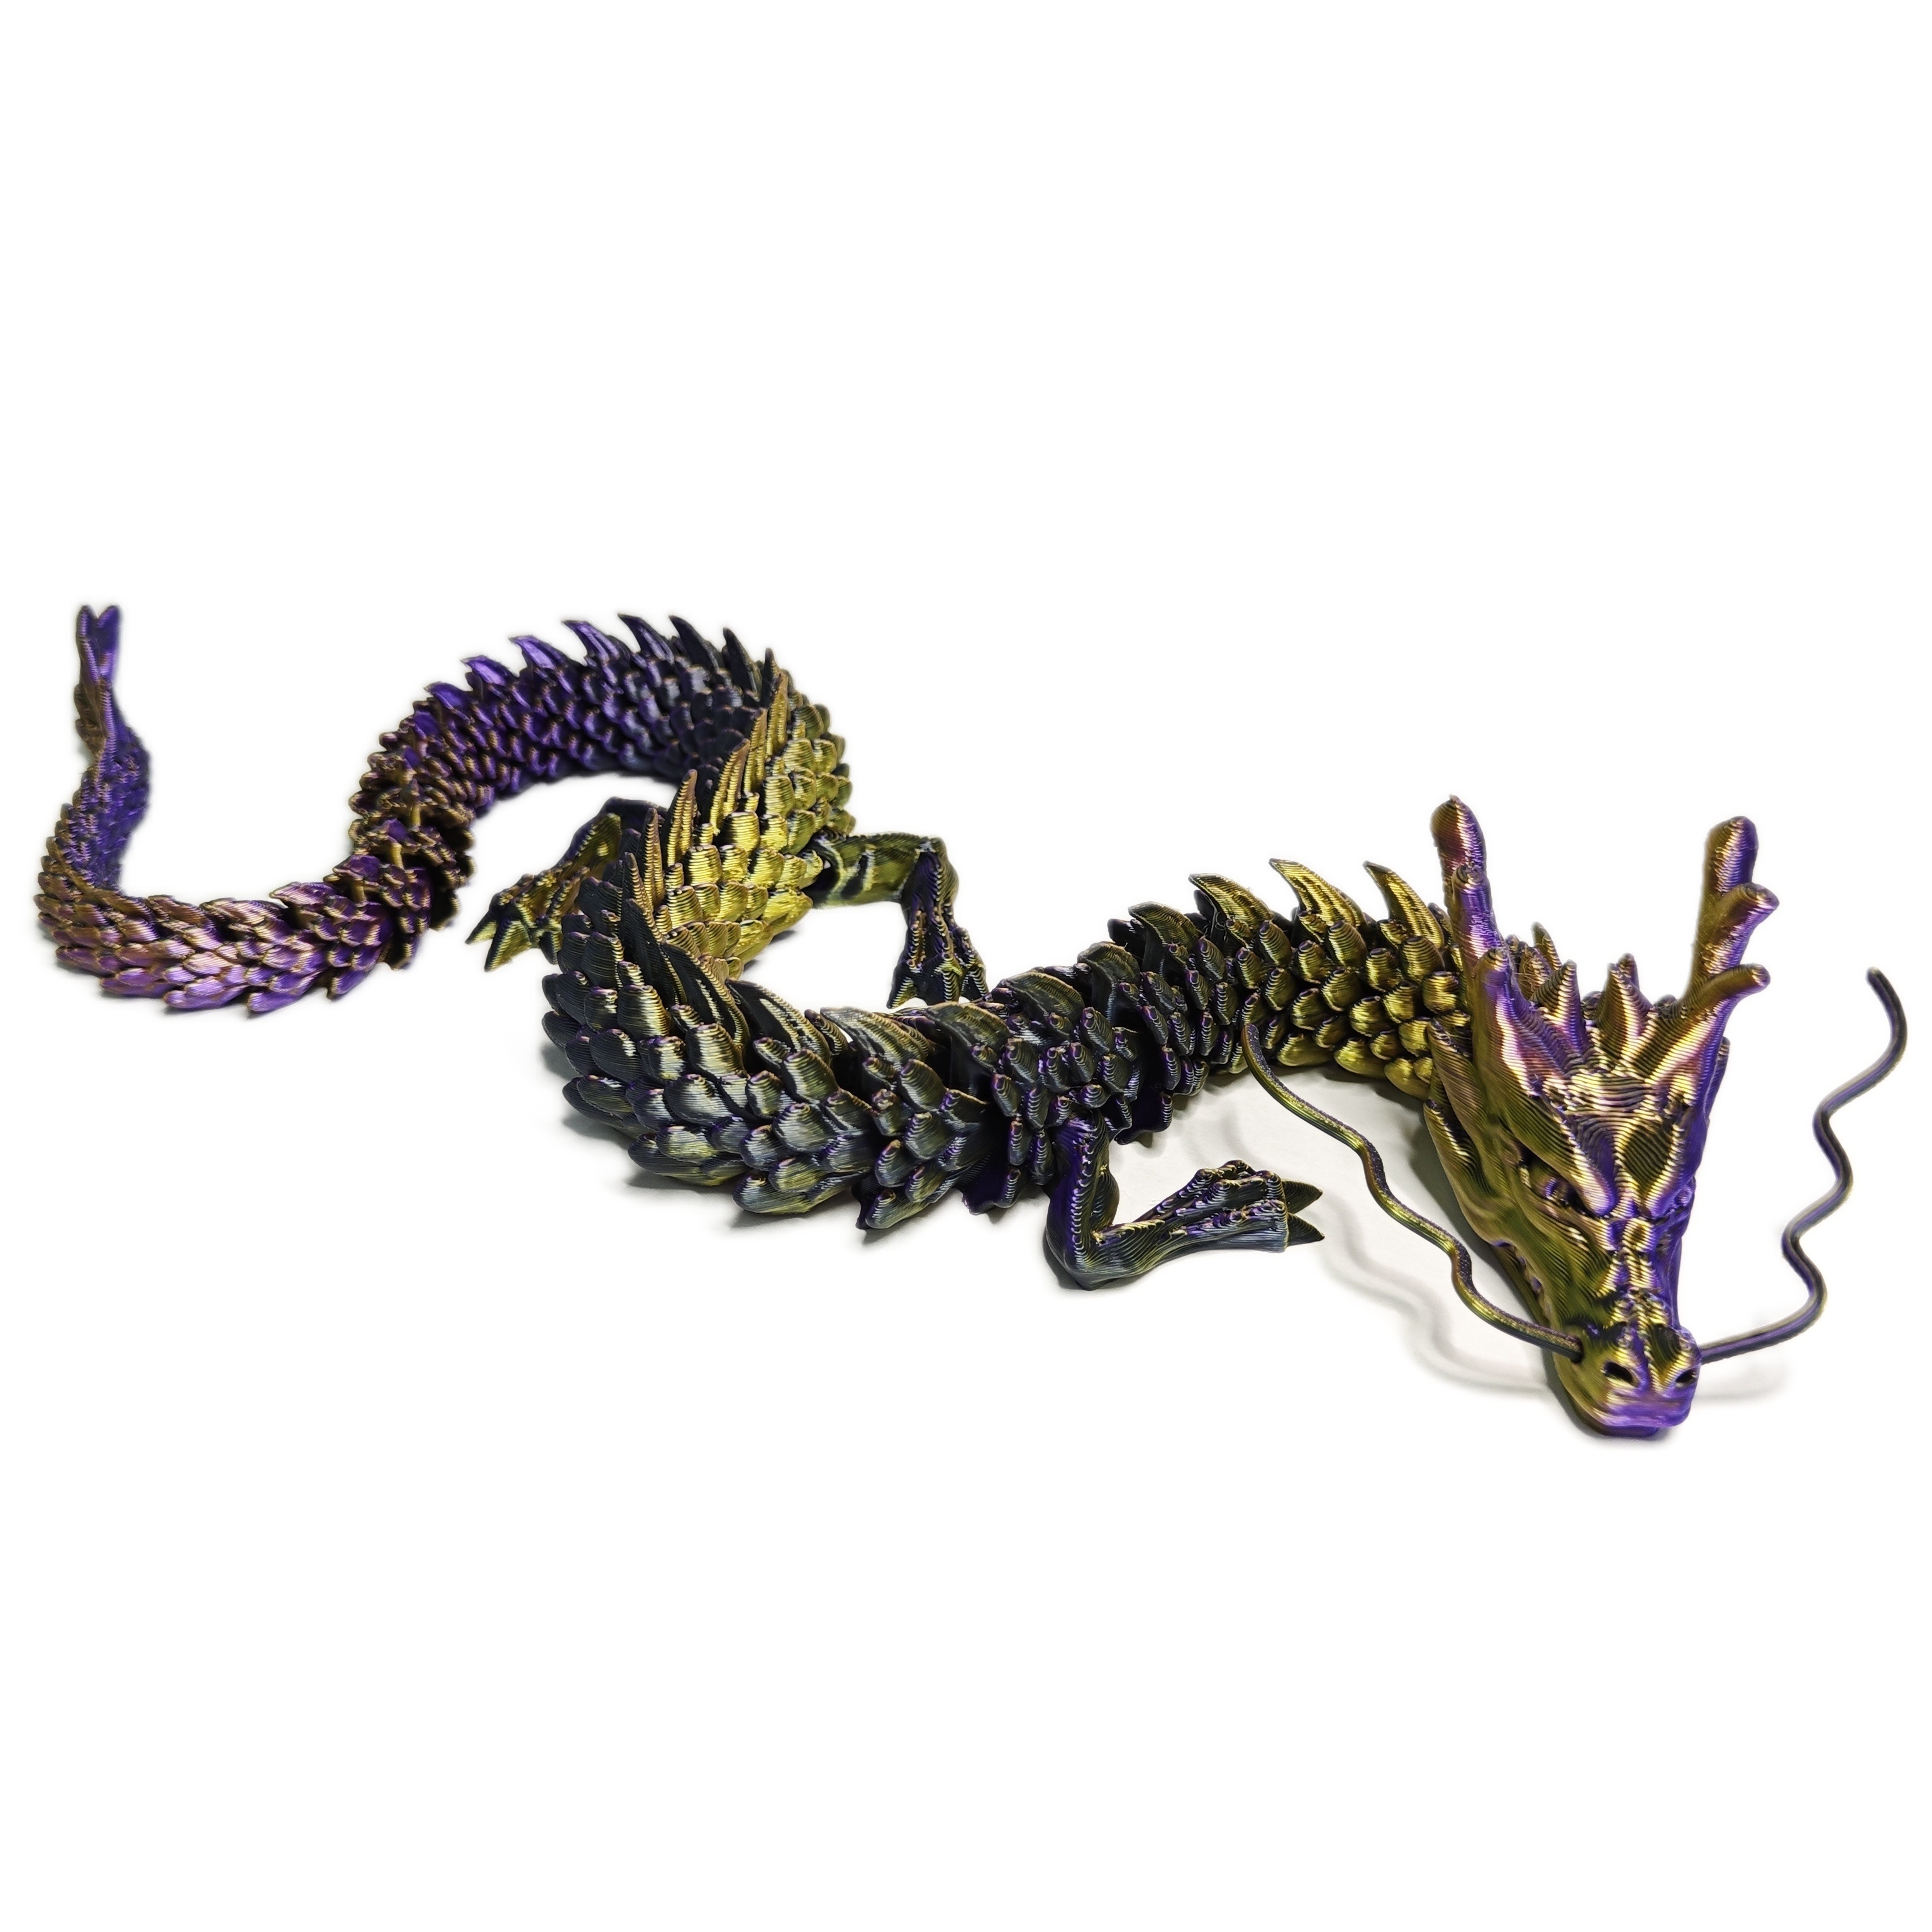 3D Printed Articulated Dragon Fidget Toy Silk Gold-Red PLA